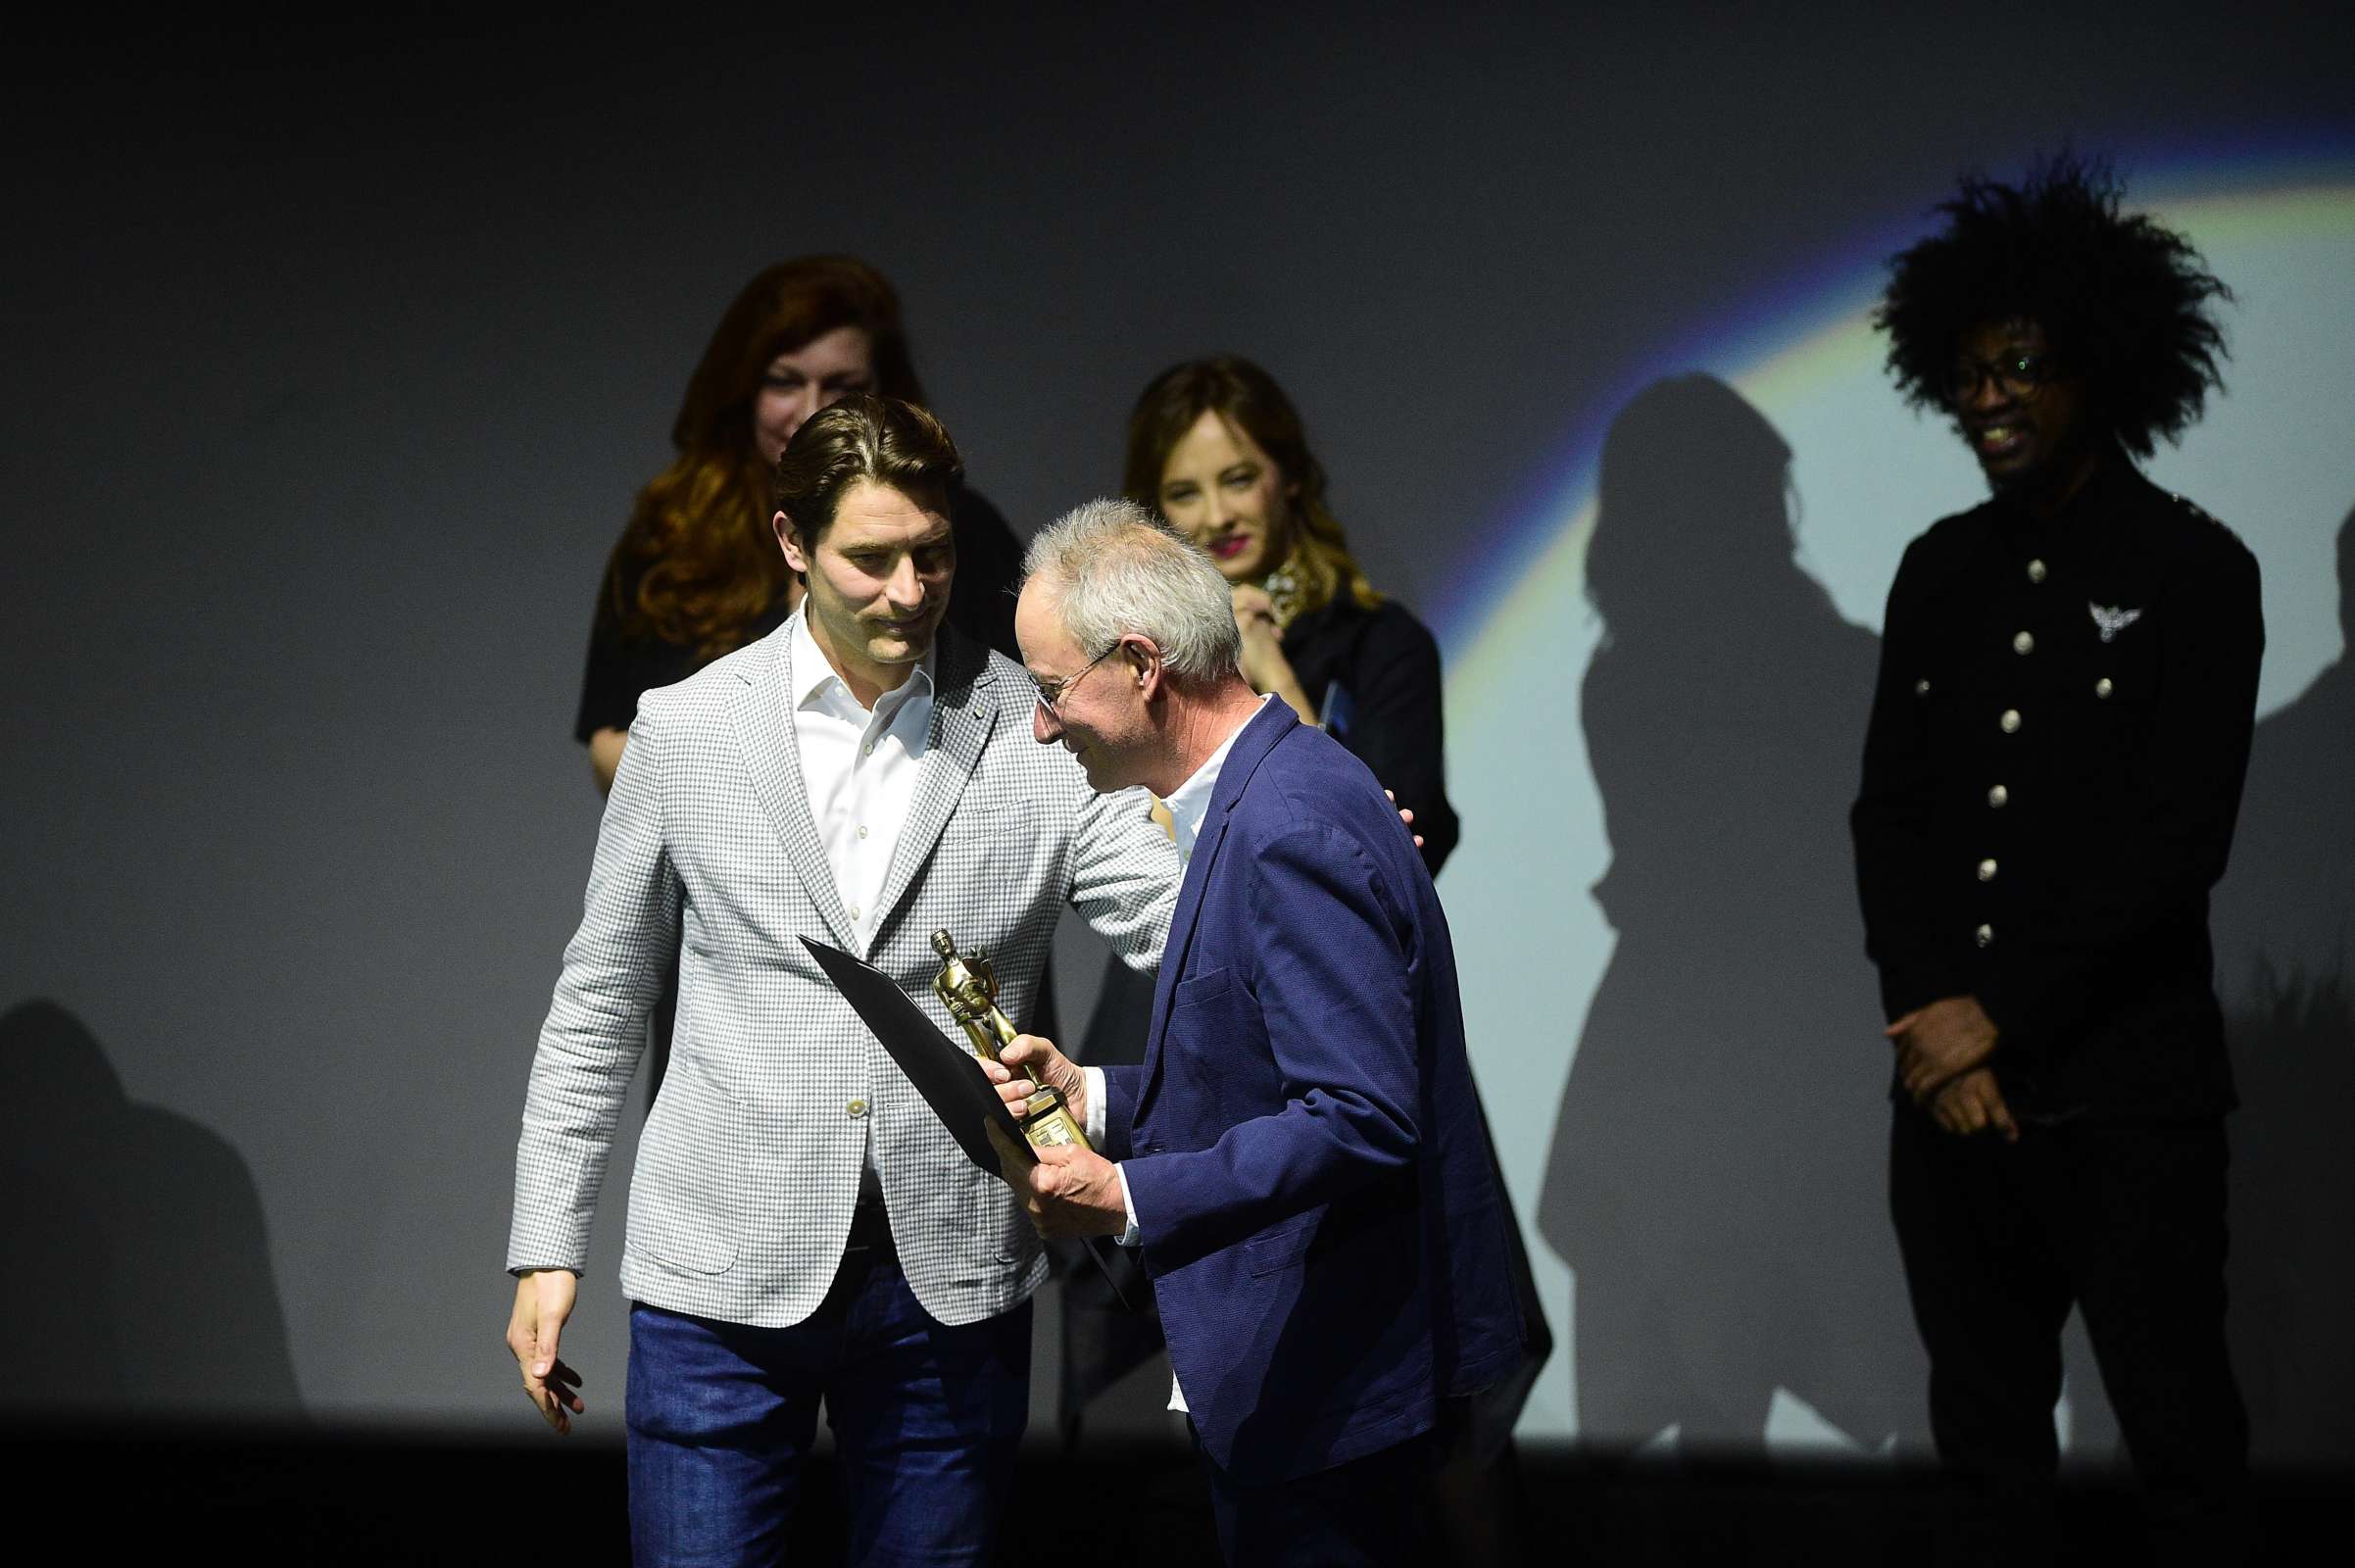 AWARD-WINNING FILM BY PURIŠA ĐORĐEVIĆ ‘MOUTH FULL OF EARTH’ CLOSES 51ST FEST